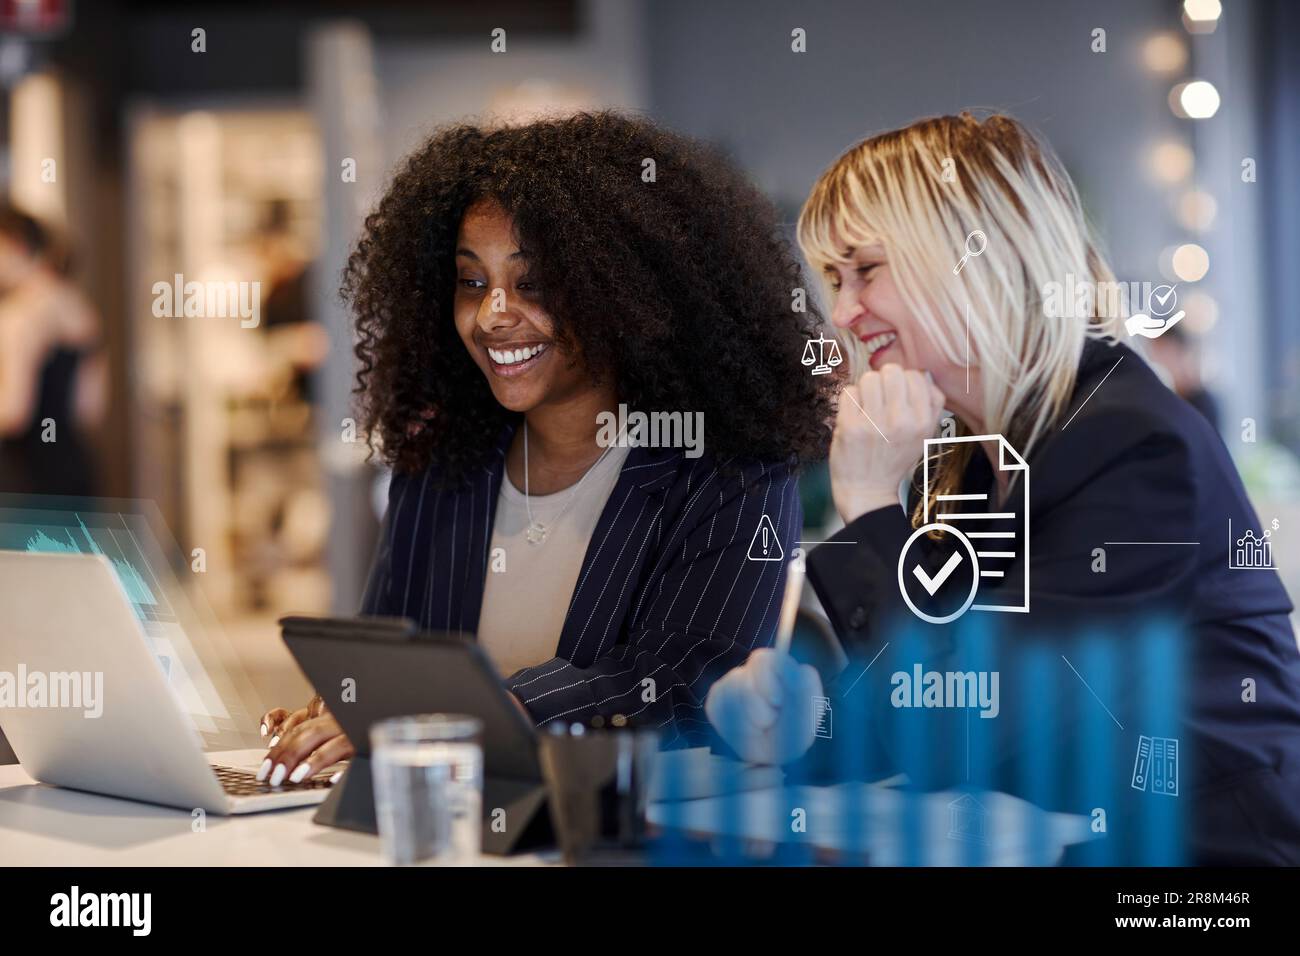 Smiling women in office using laptop together Stock Photo